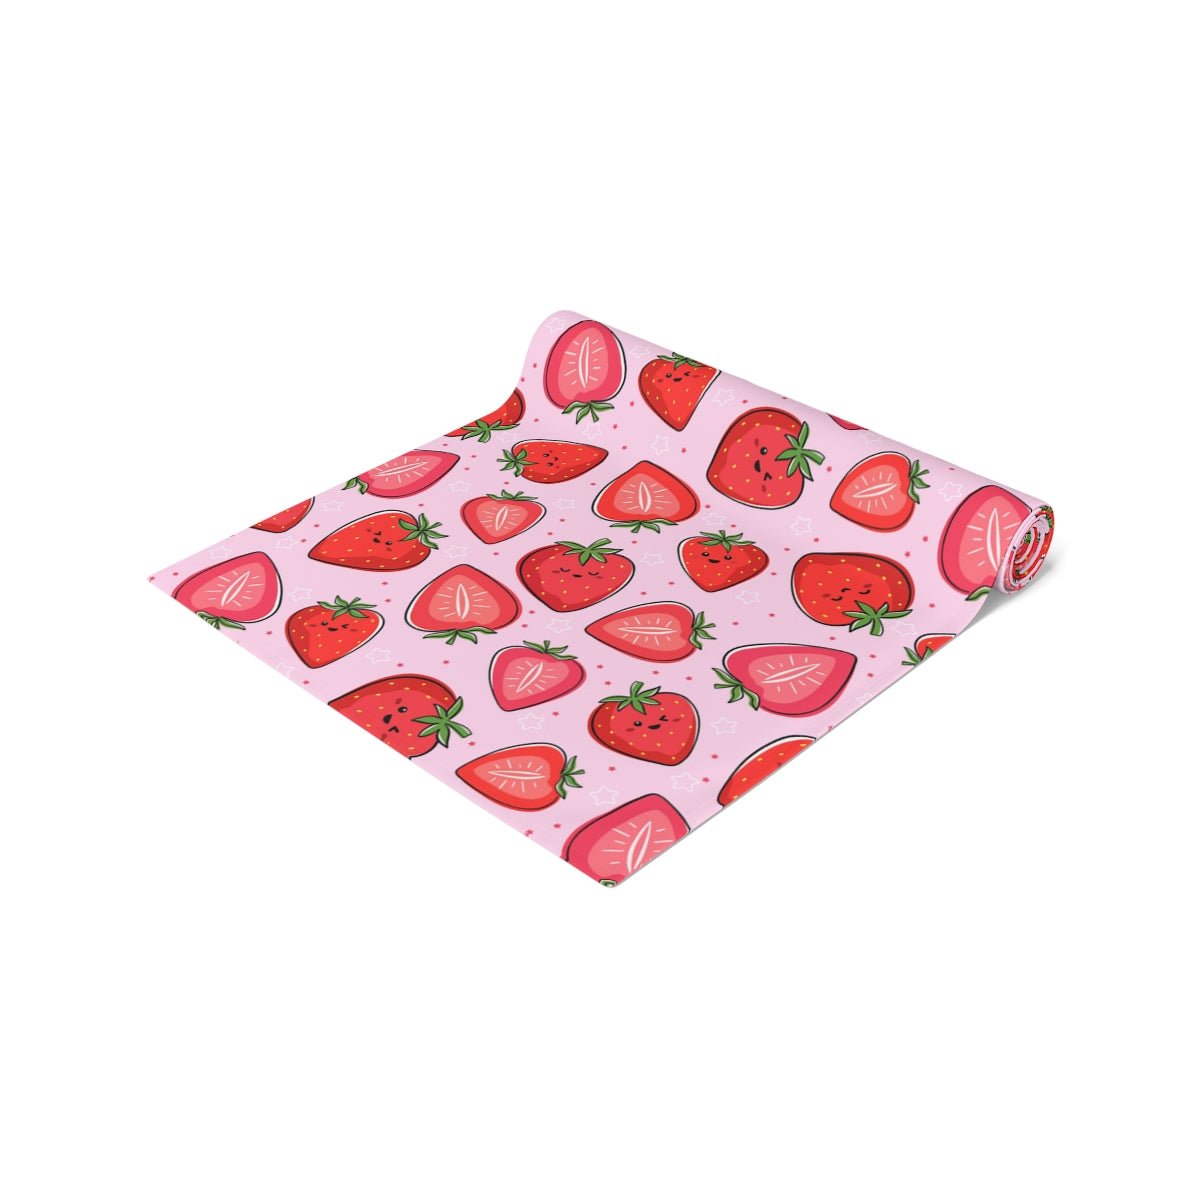 Kawaii Strawberries Table Runner - Puffin Lime